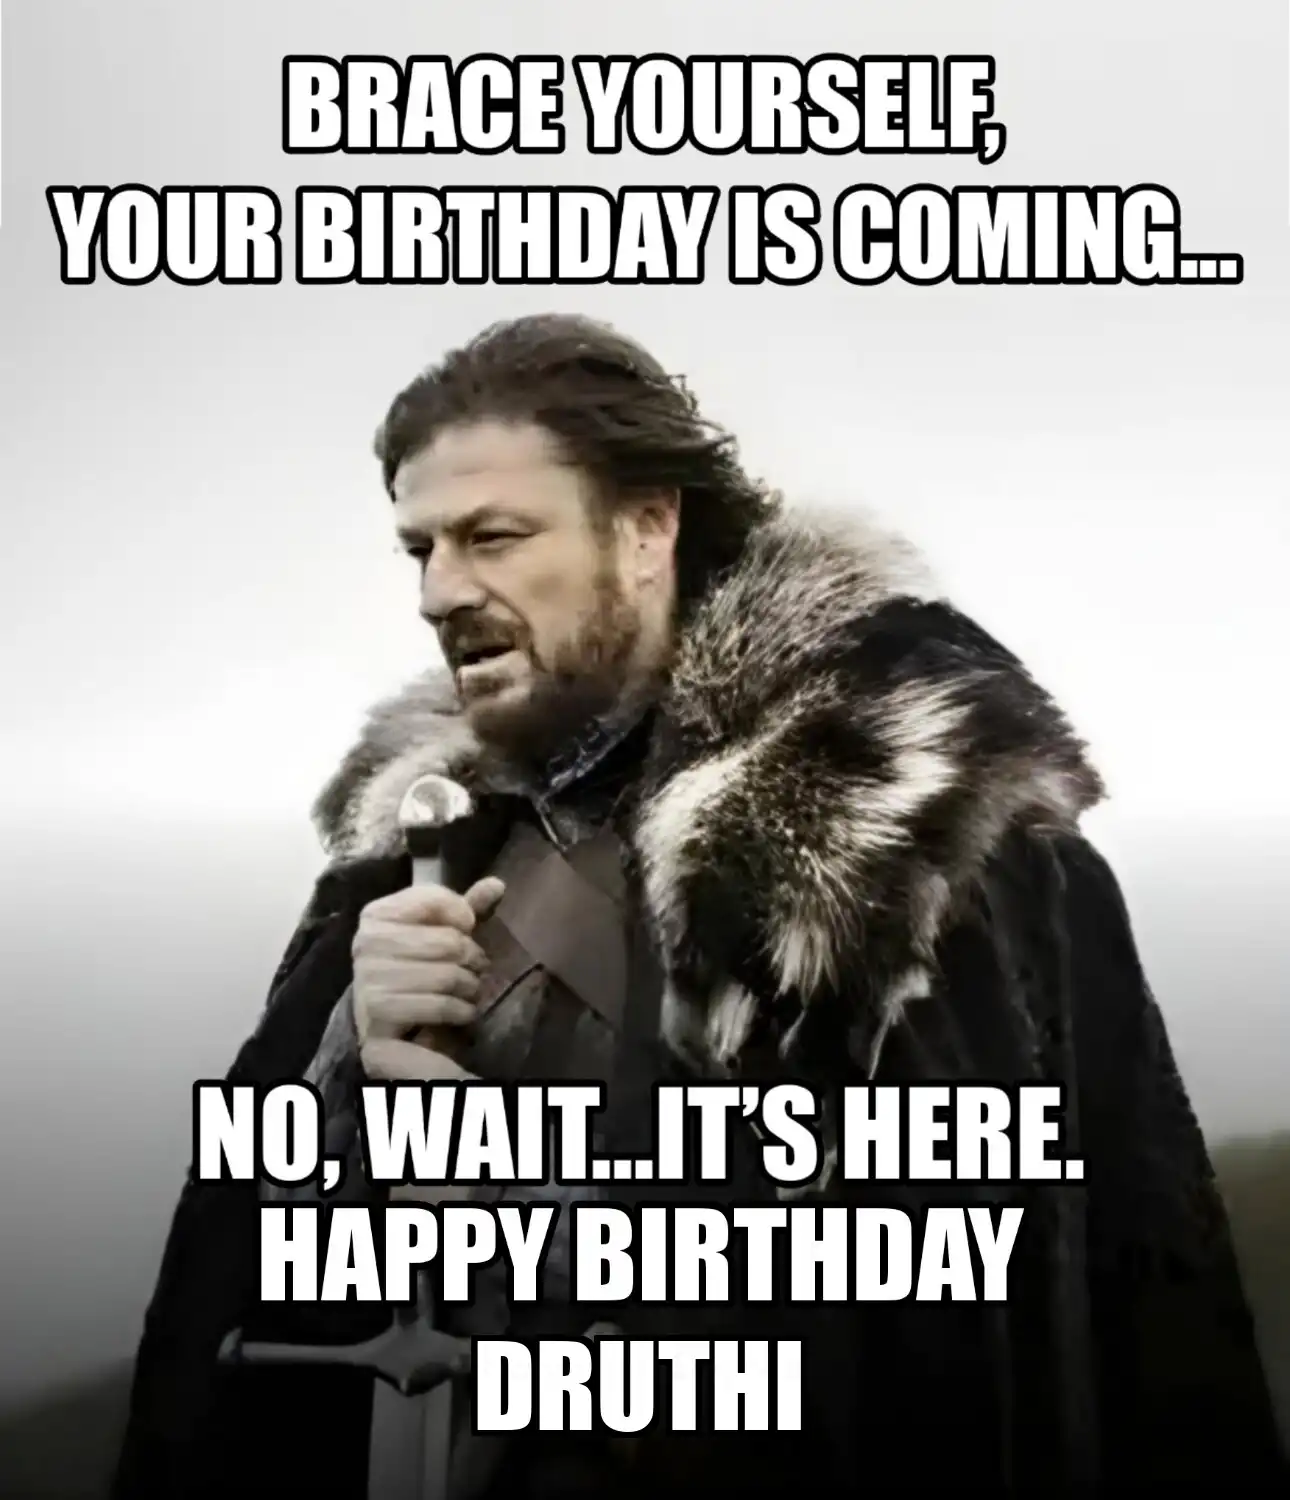 Happy Birthday Druthi Brace Yourself Your Birthday Is Coming Meme